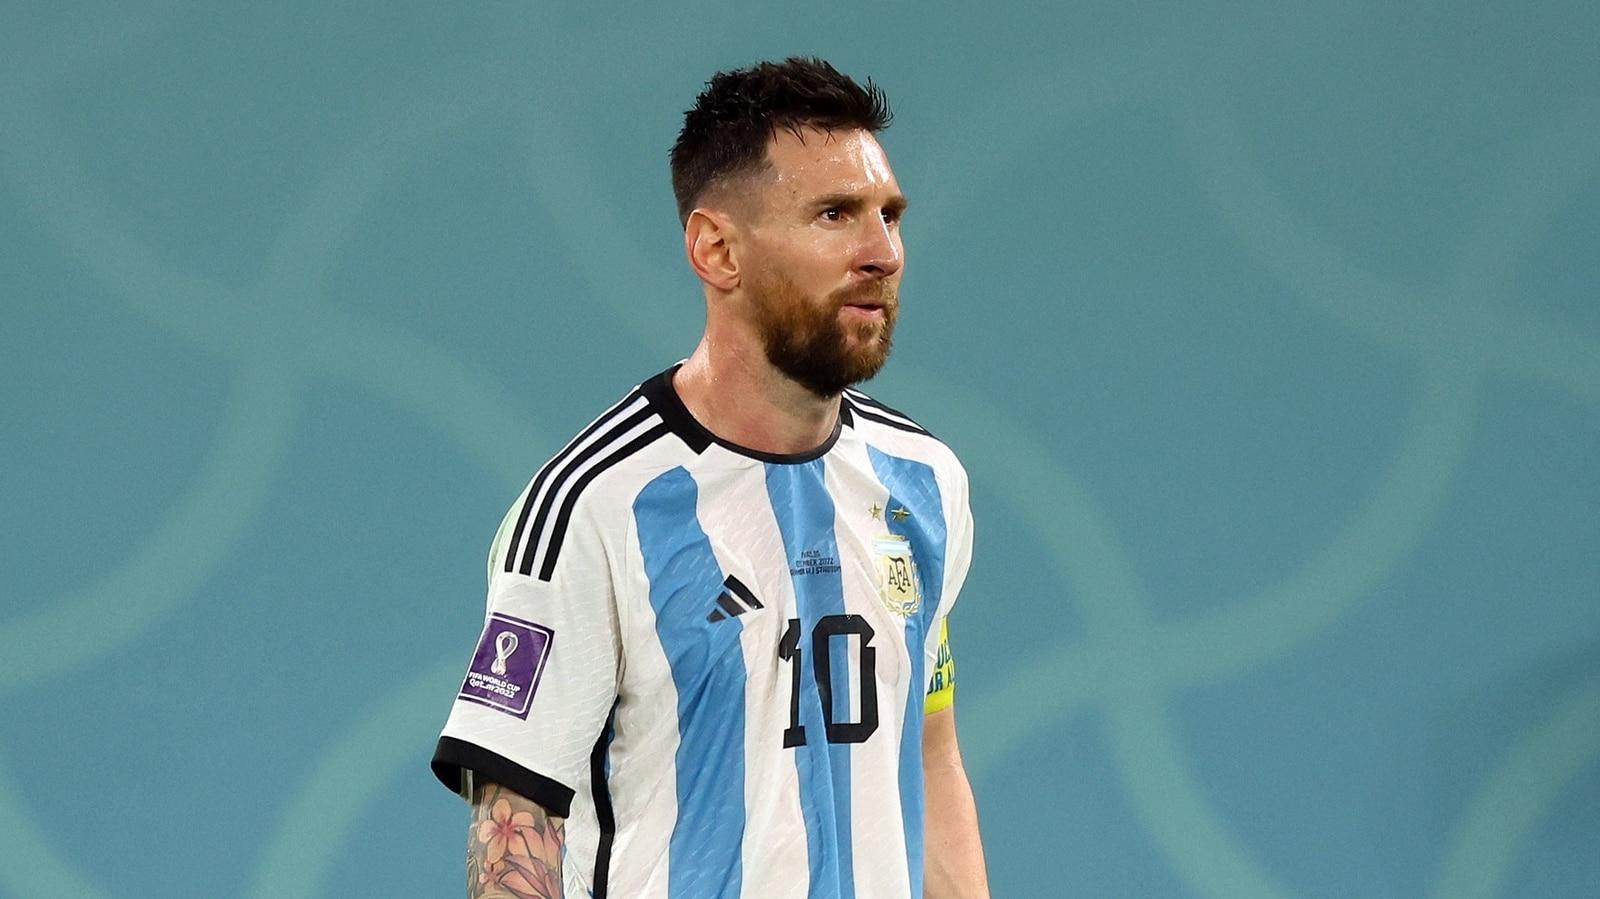 Lionel Messi S Unexpected Reaction To 1000th Match Query After